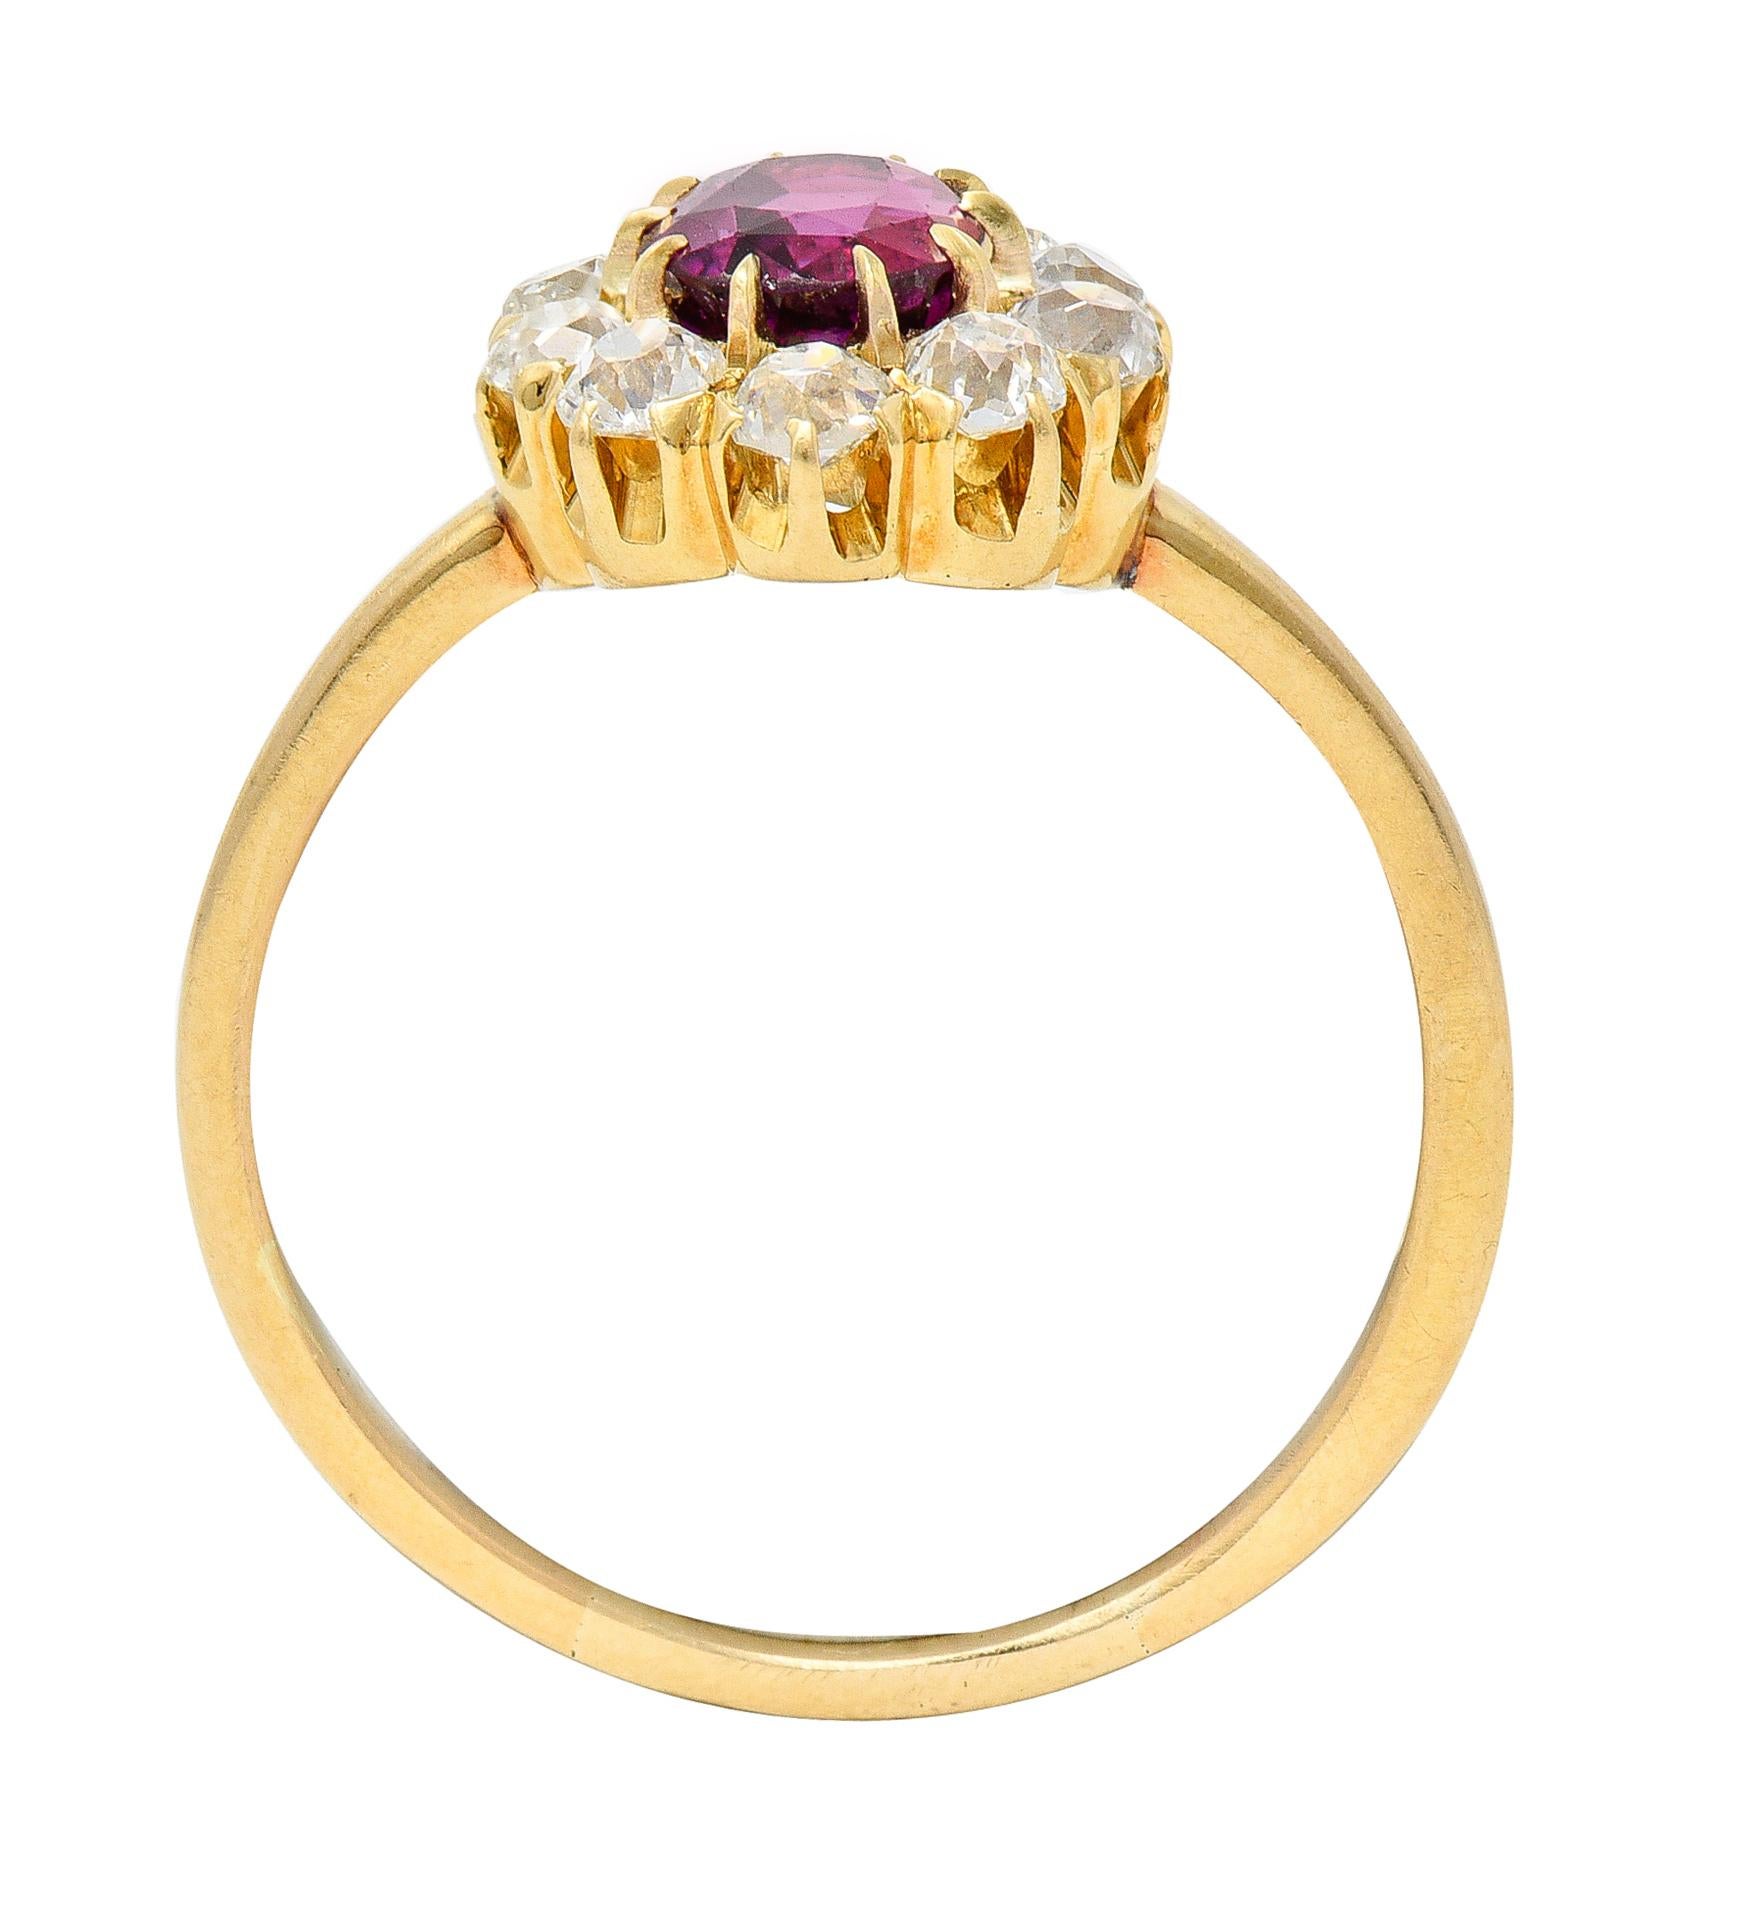 Victorian 1.82 Carats Ruby Diamond 14 Karat Yellow Gold Antique Cluster Ring For Sale 2